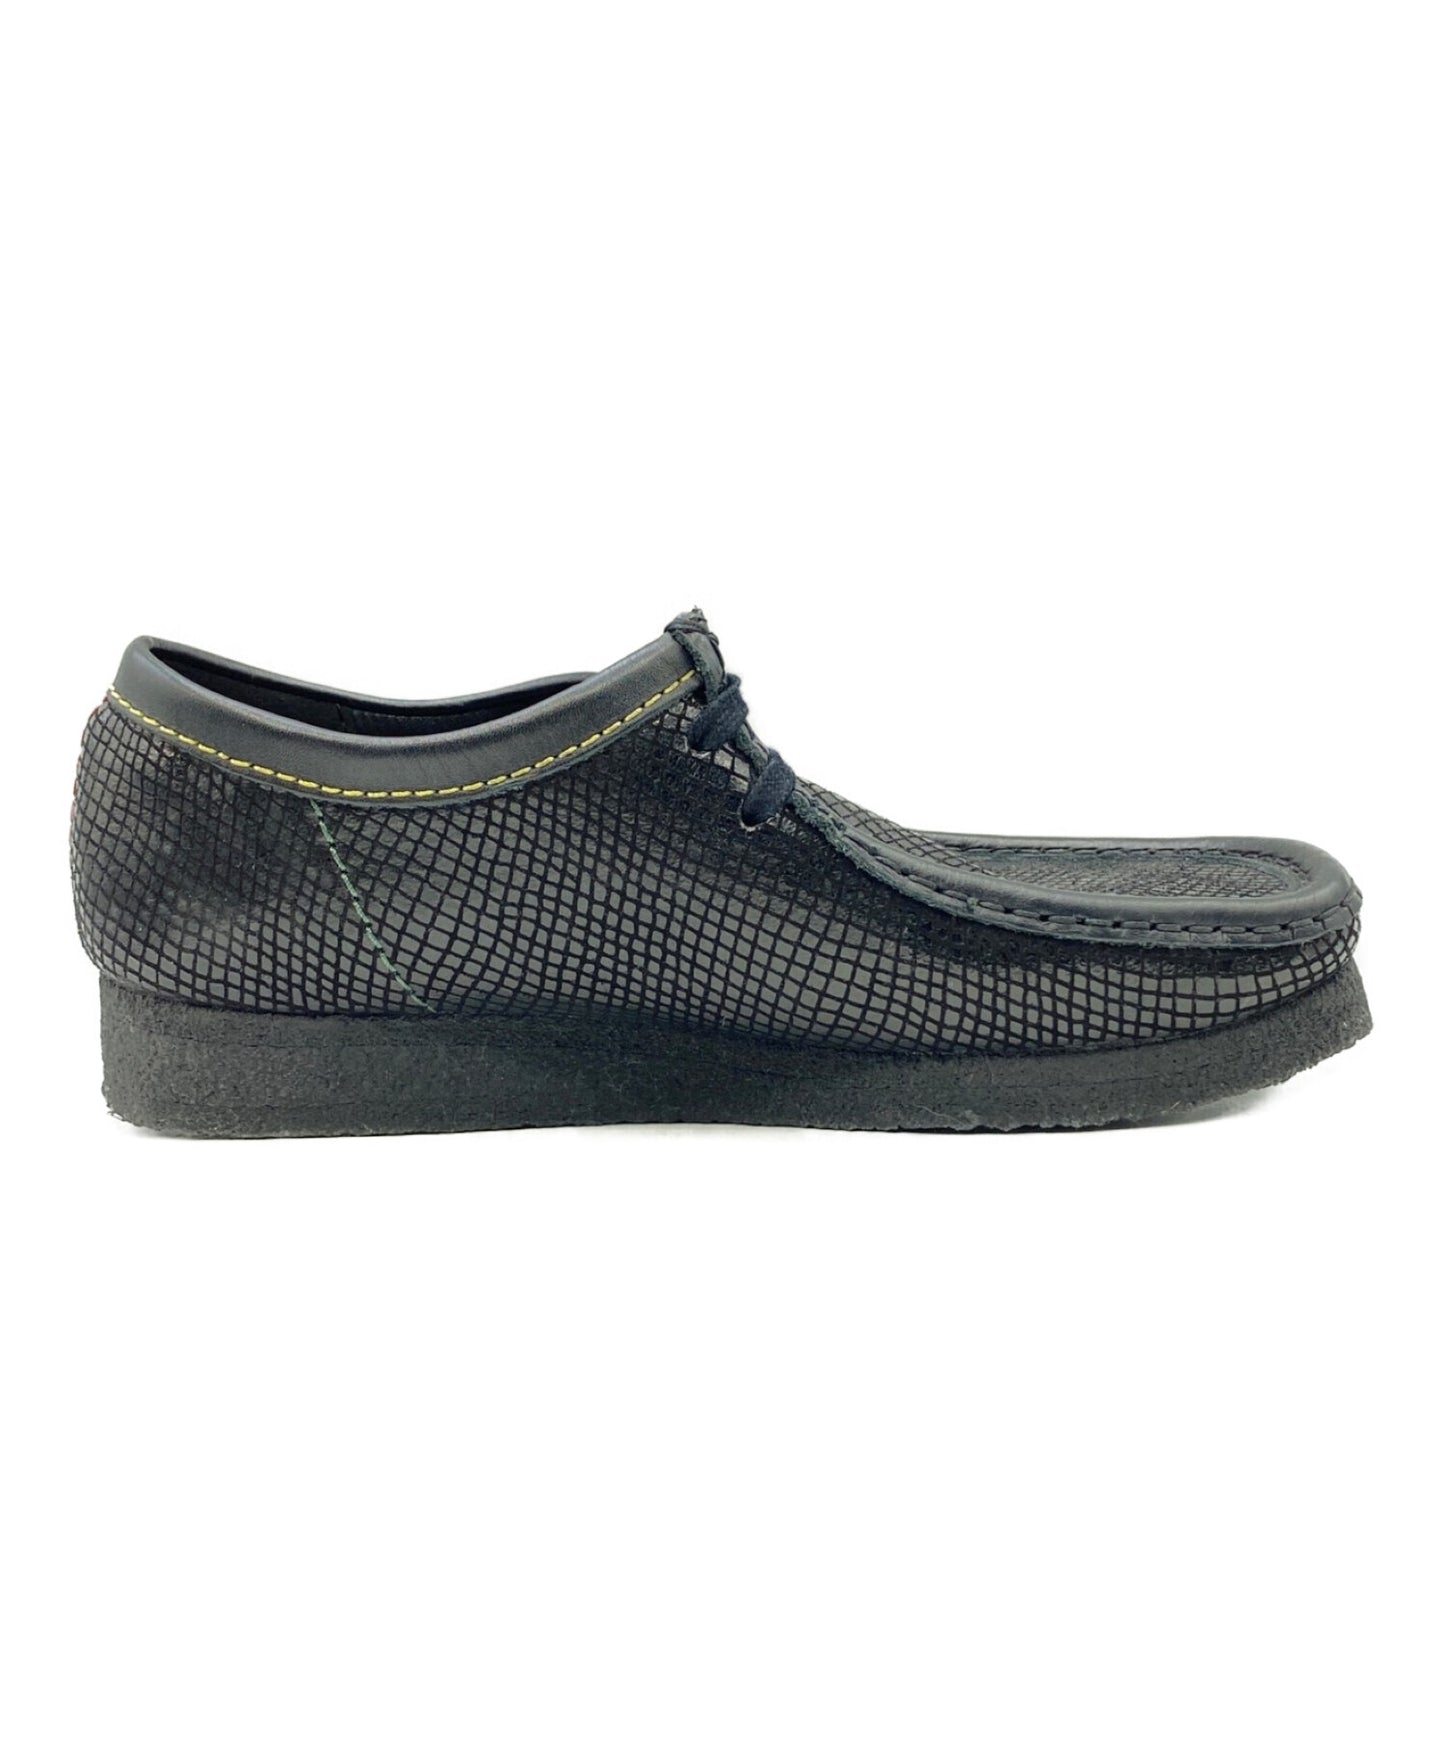 [Pre-owned] WACKO MARIA SNAKE EMBOSSED LEATHER WALLABEE 61616568